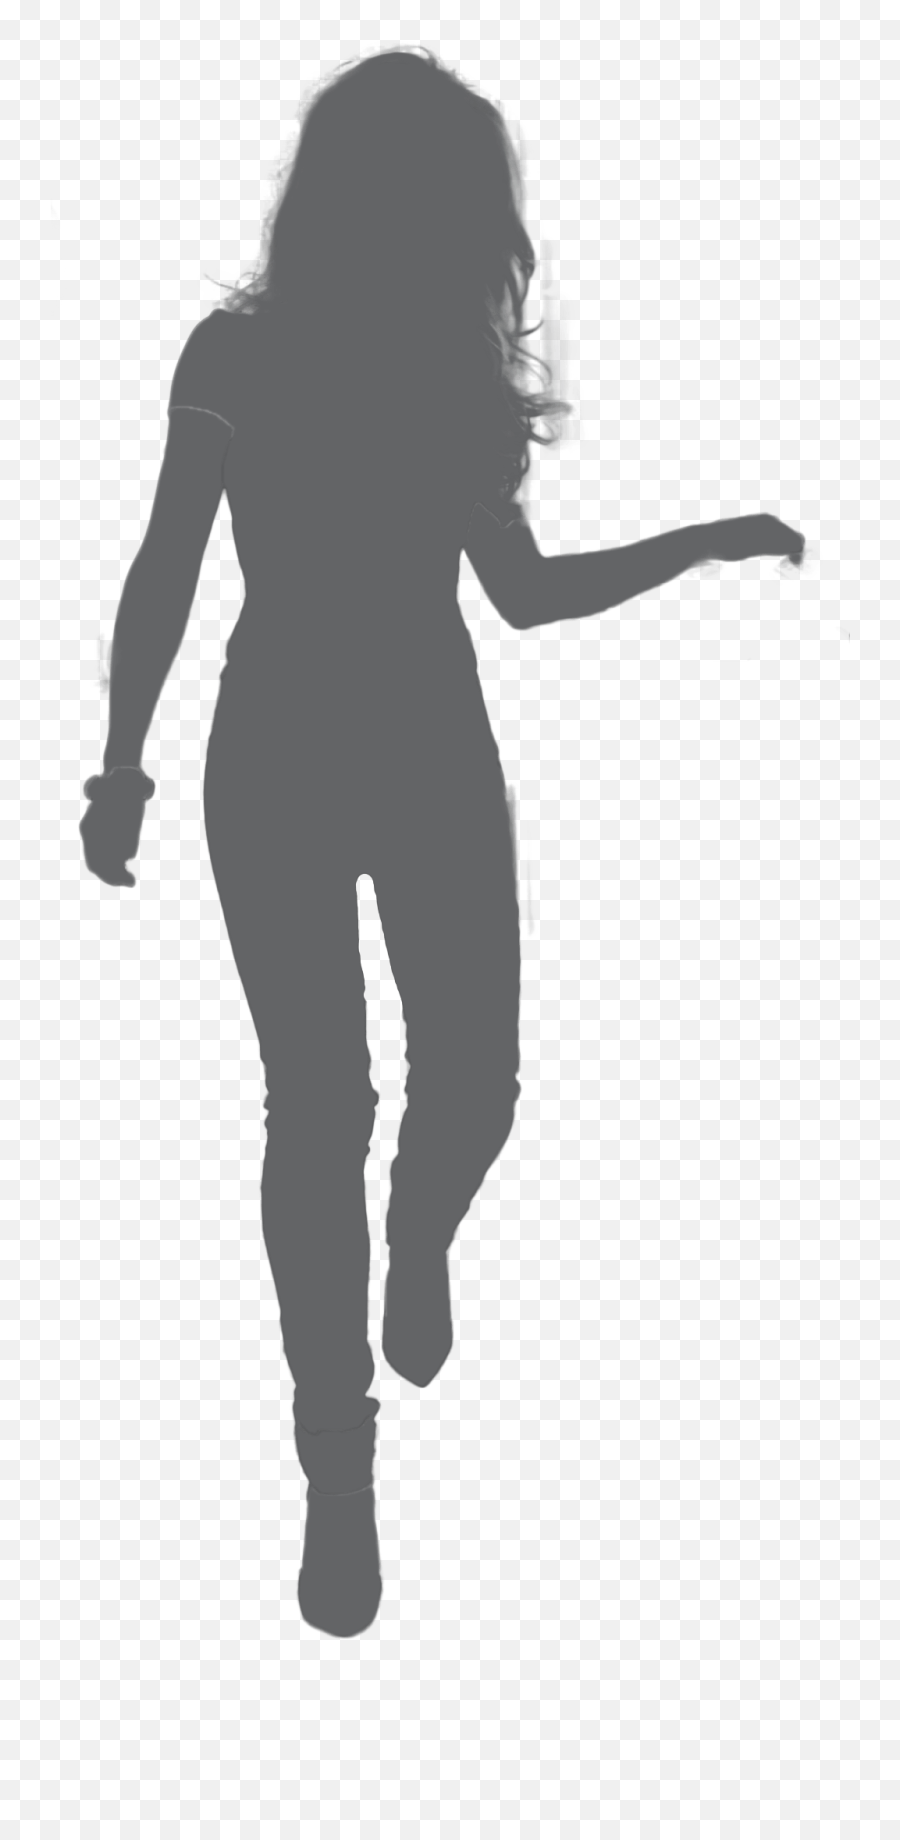 Silhouette Walking Image Staircases - Silhouette Of Woman Walking Png,Walking Silhouette Png